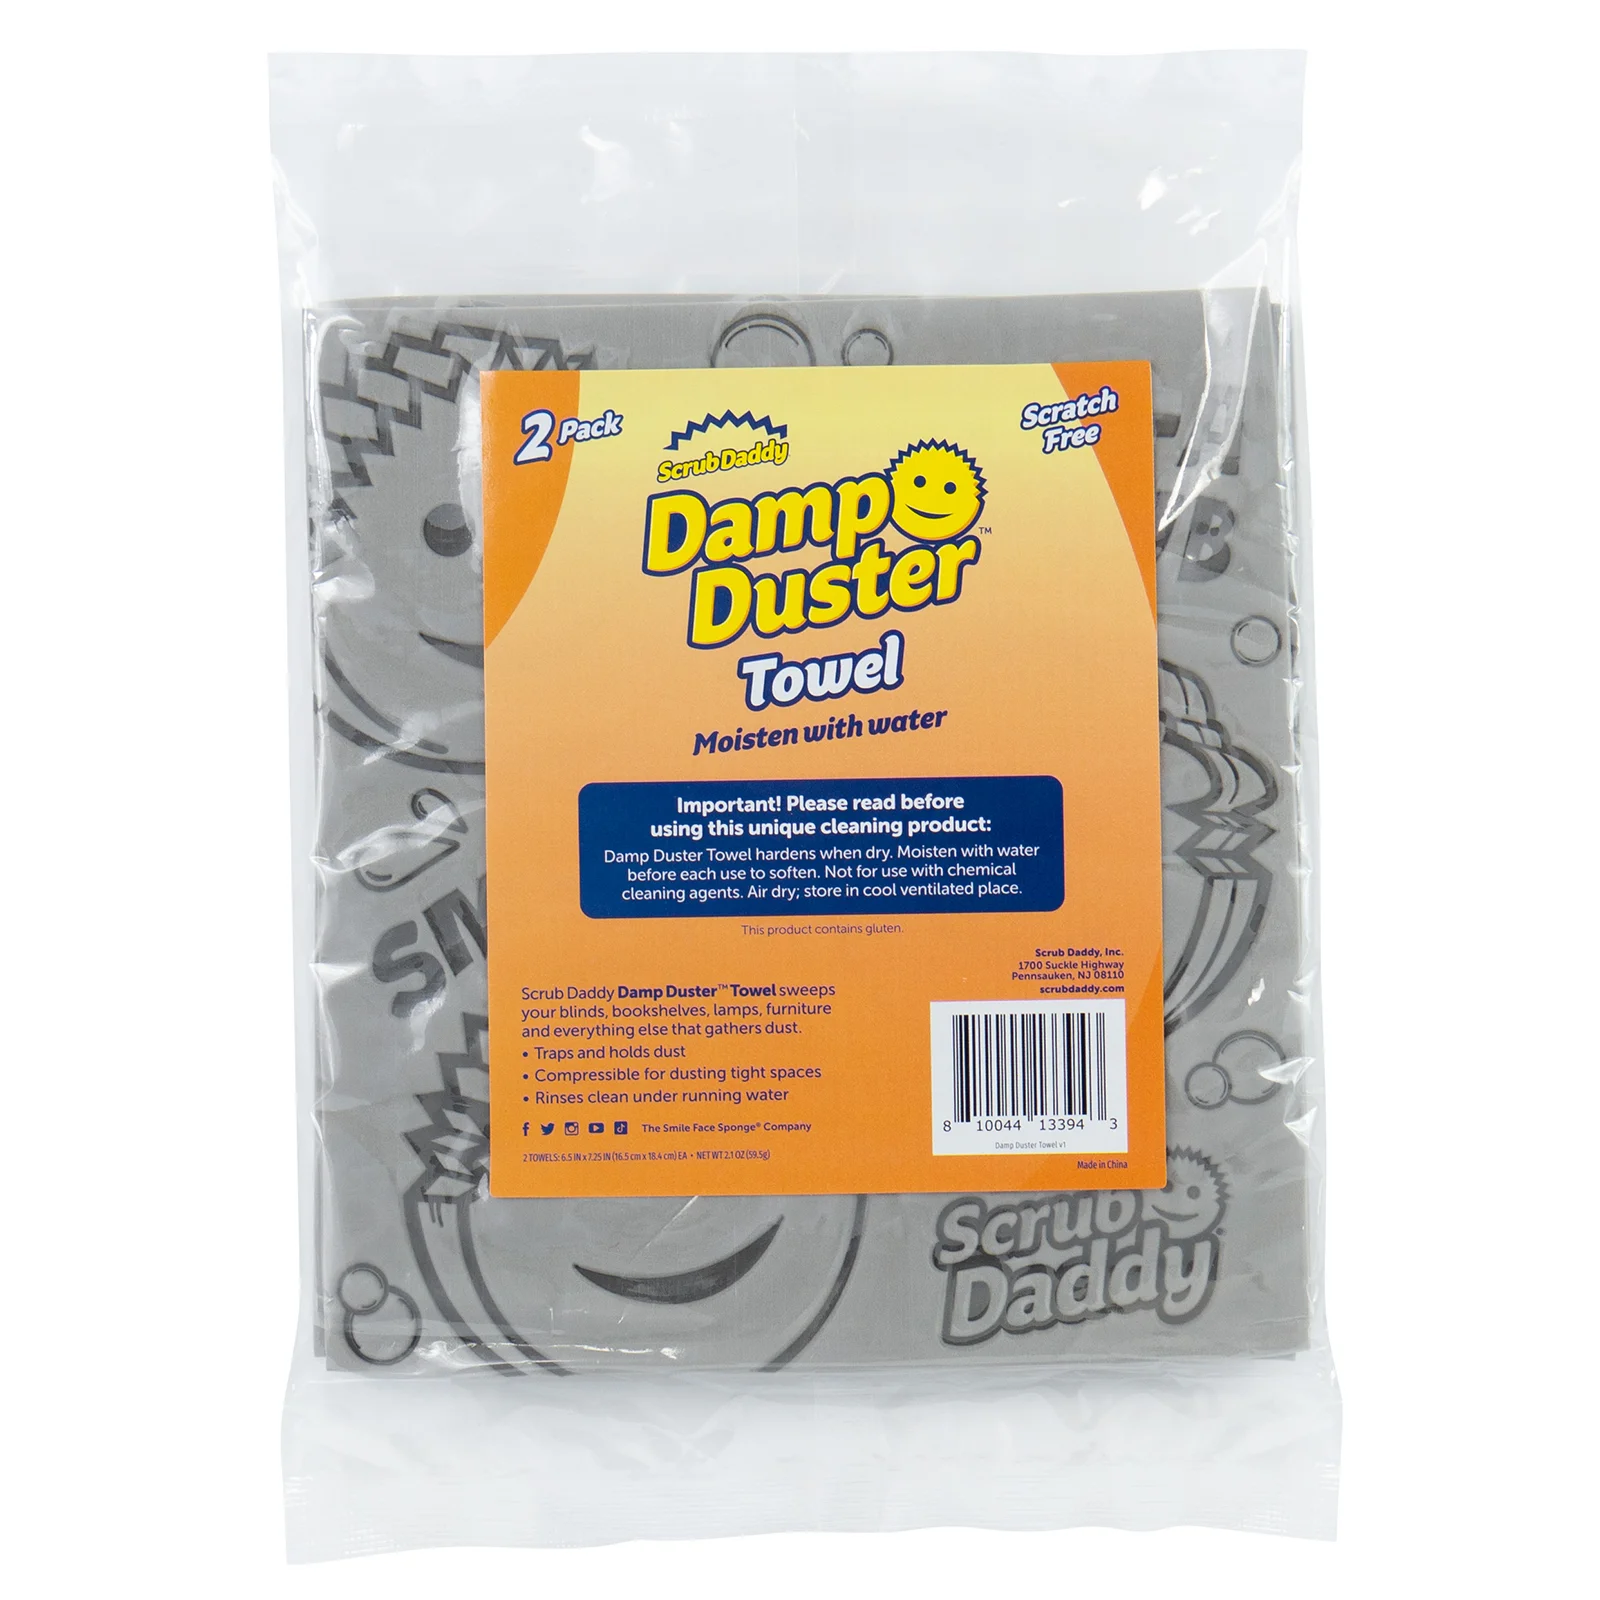 Scrub Daddy Damp Duster Review. I love scrub daddy products and was s